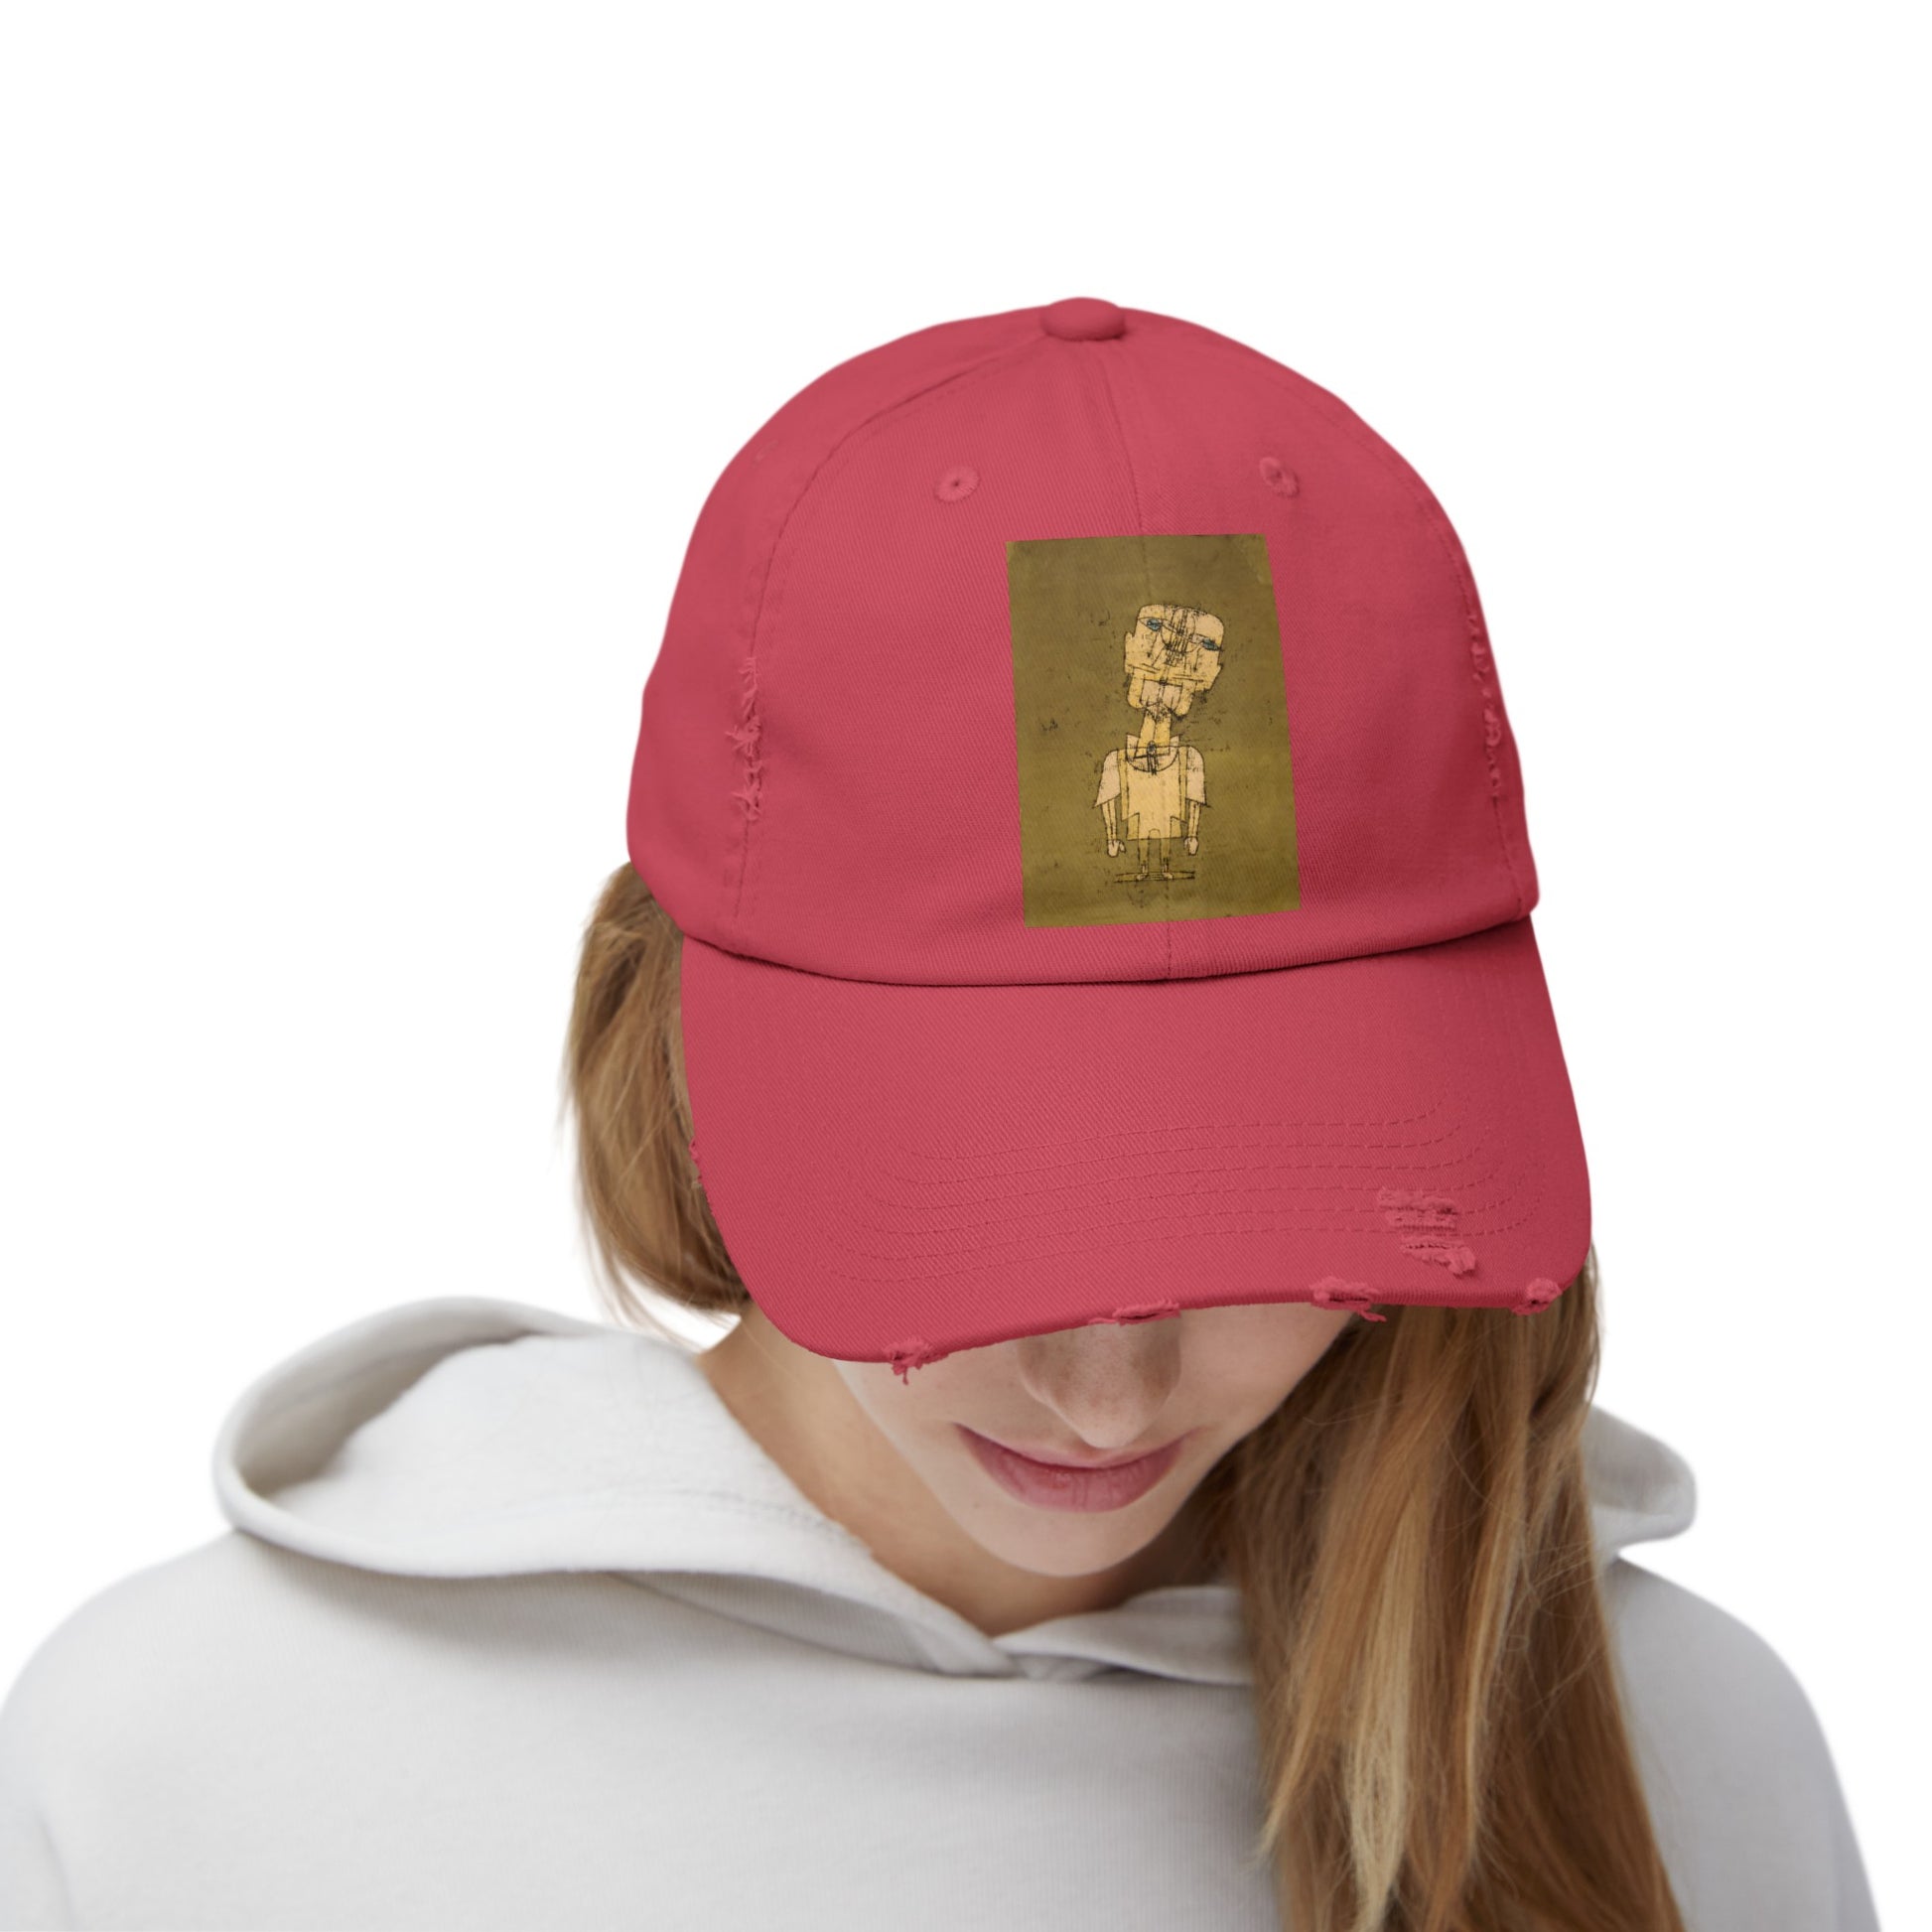 a woman wearing a red hat with a picture of a man on it